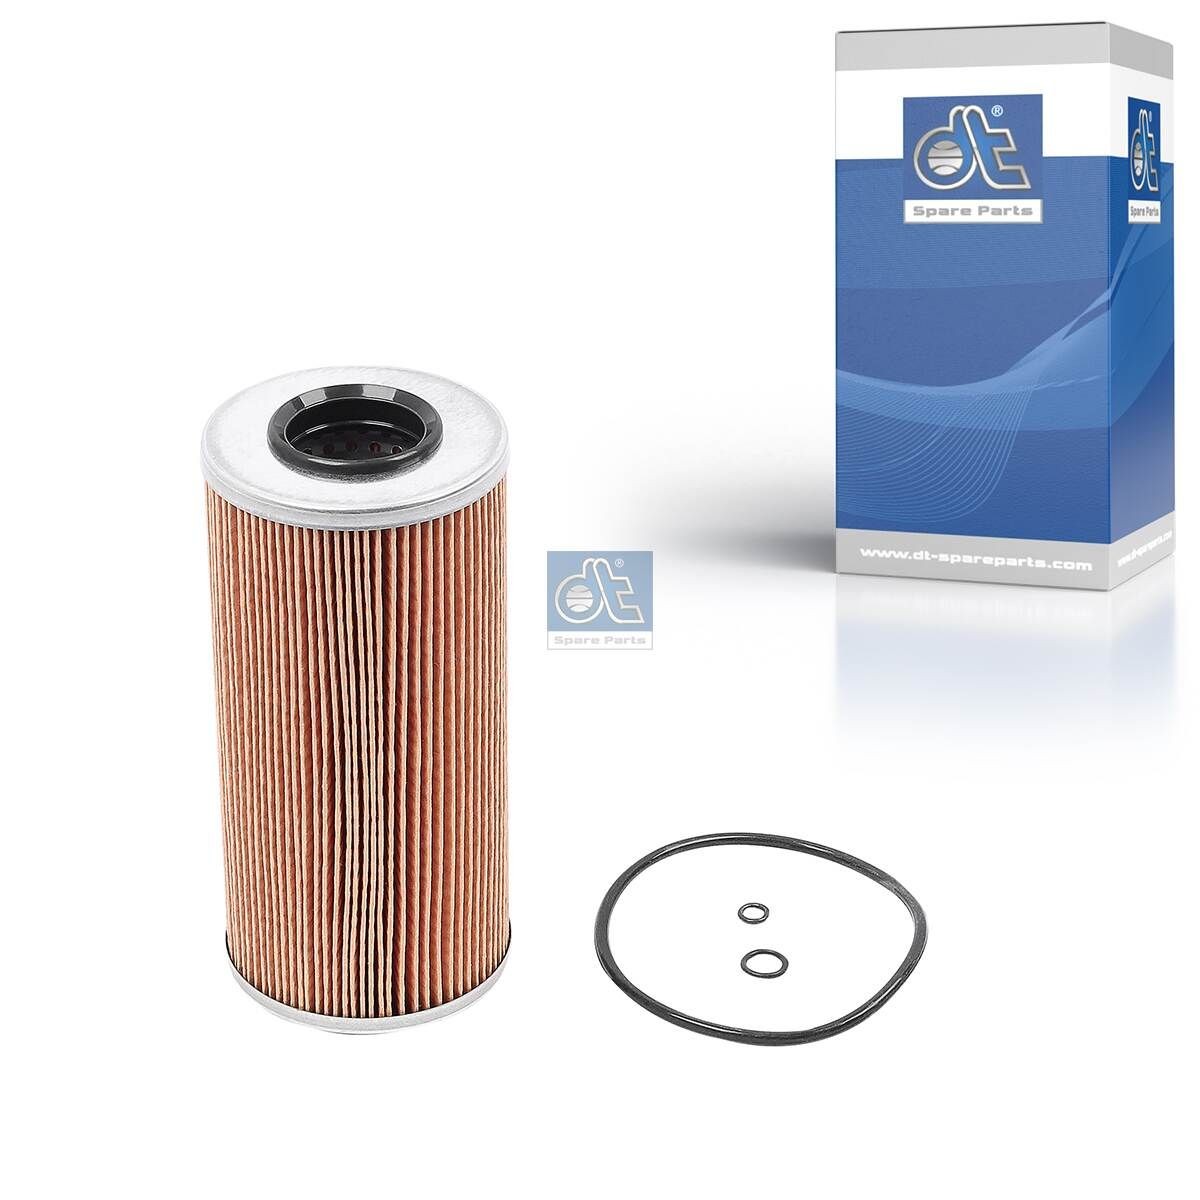 HU 951 x DT Spare Parts 3.14108 Oil filter 606 184 0025